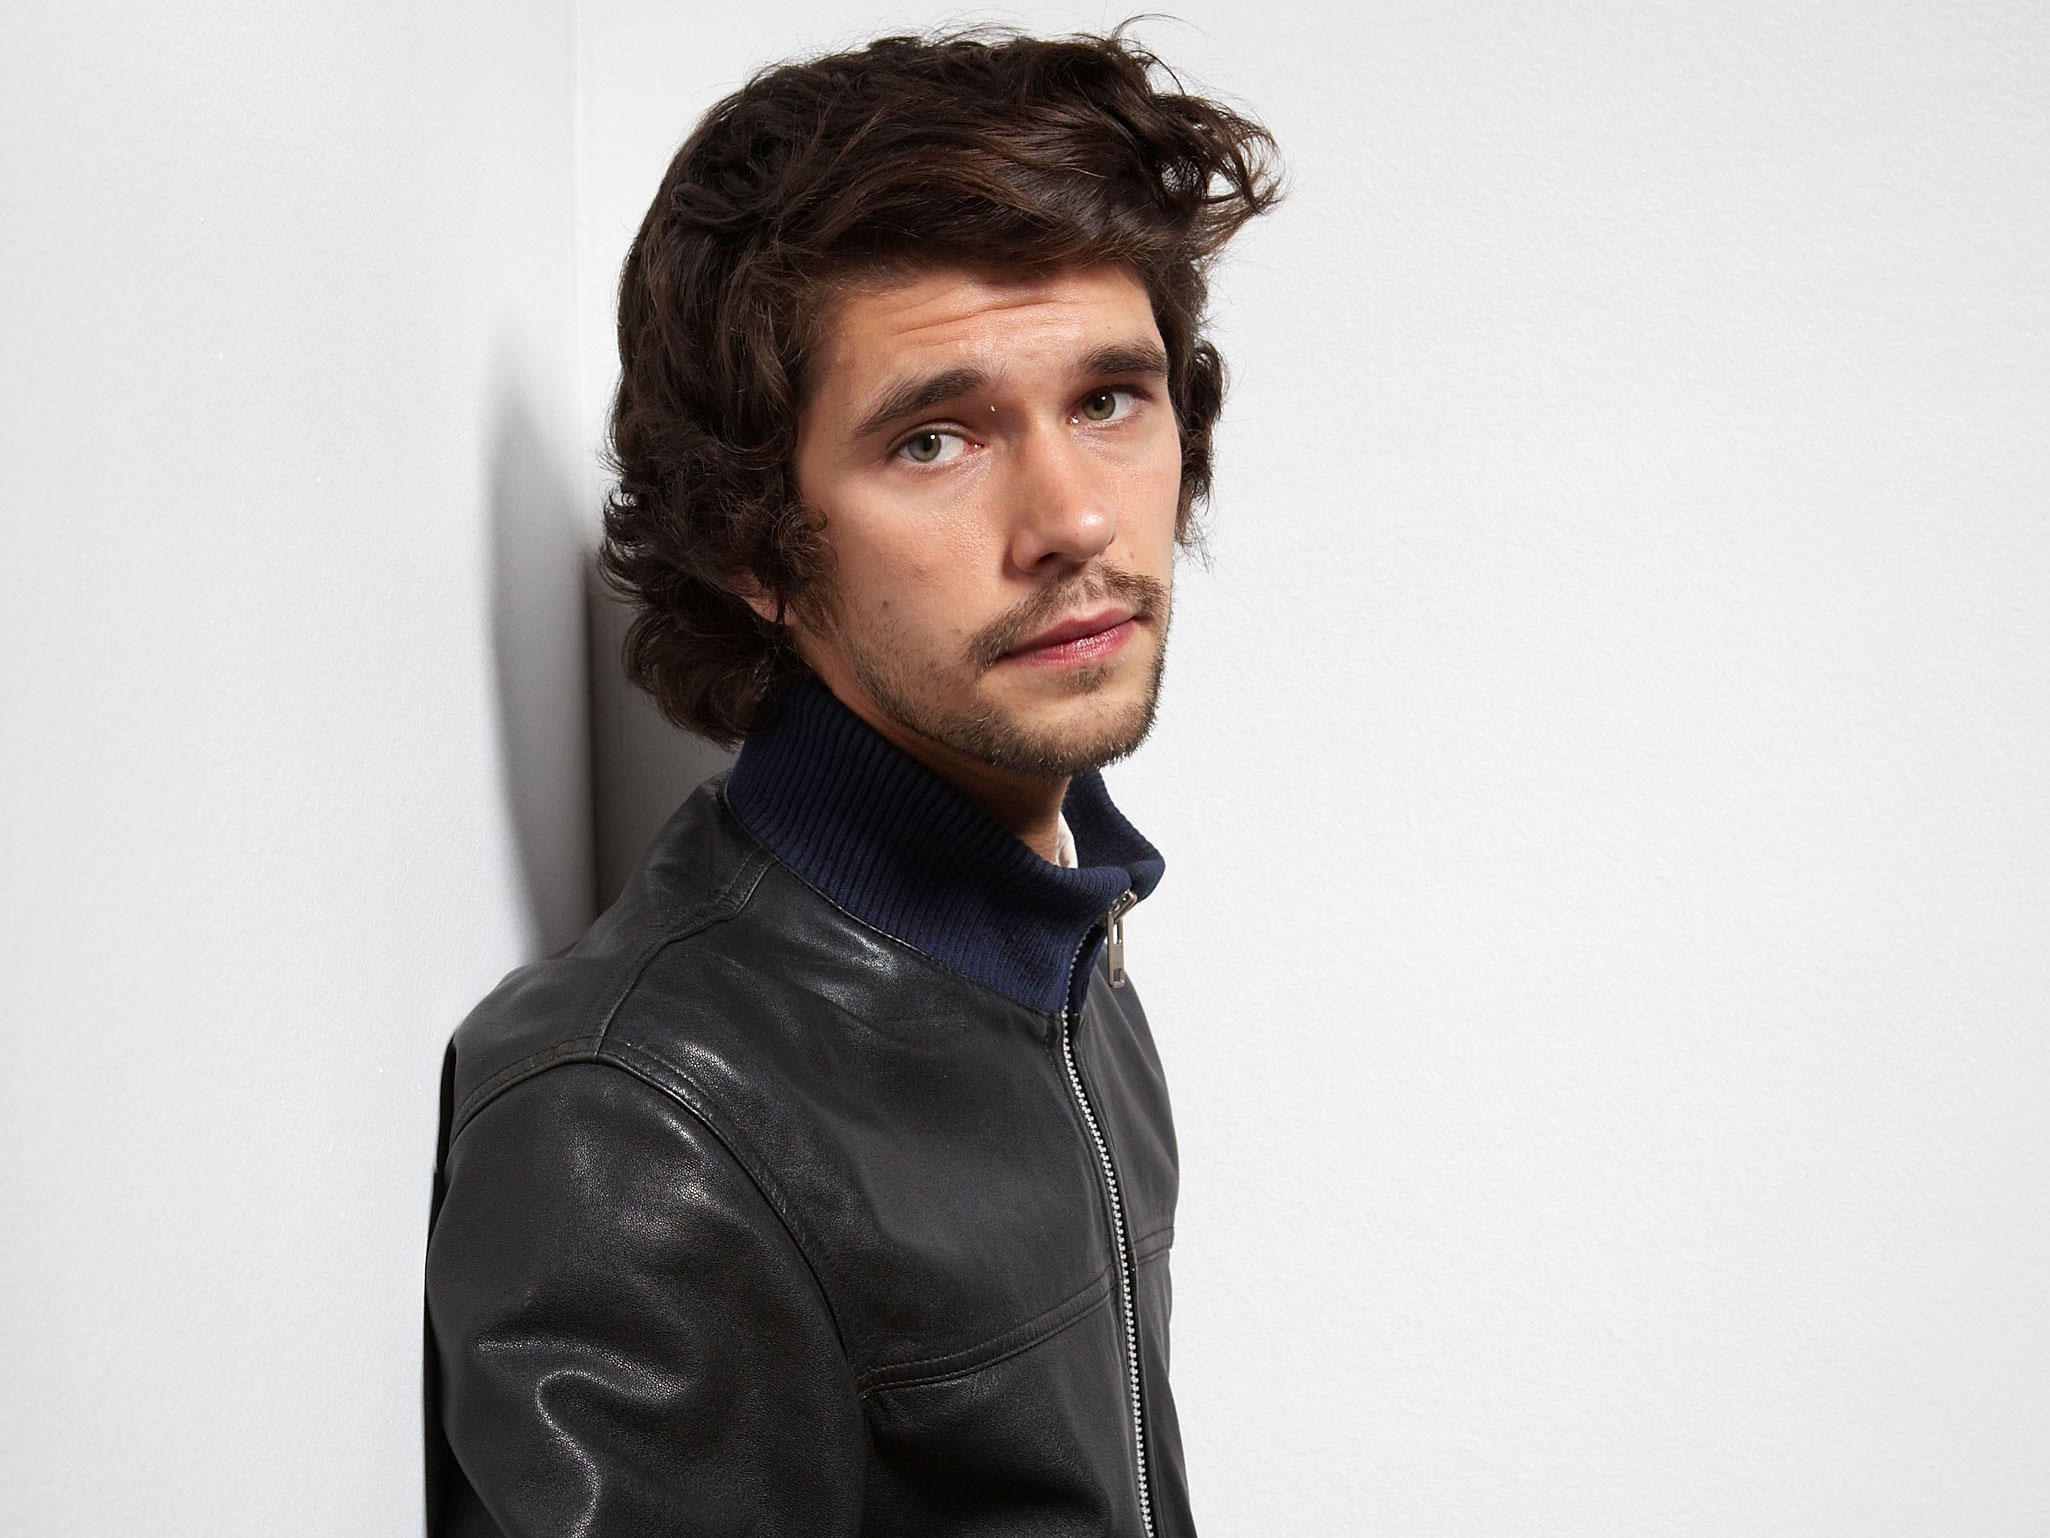 Ben Whishaw in Days and Nights